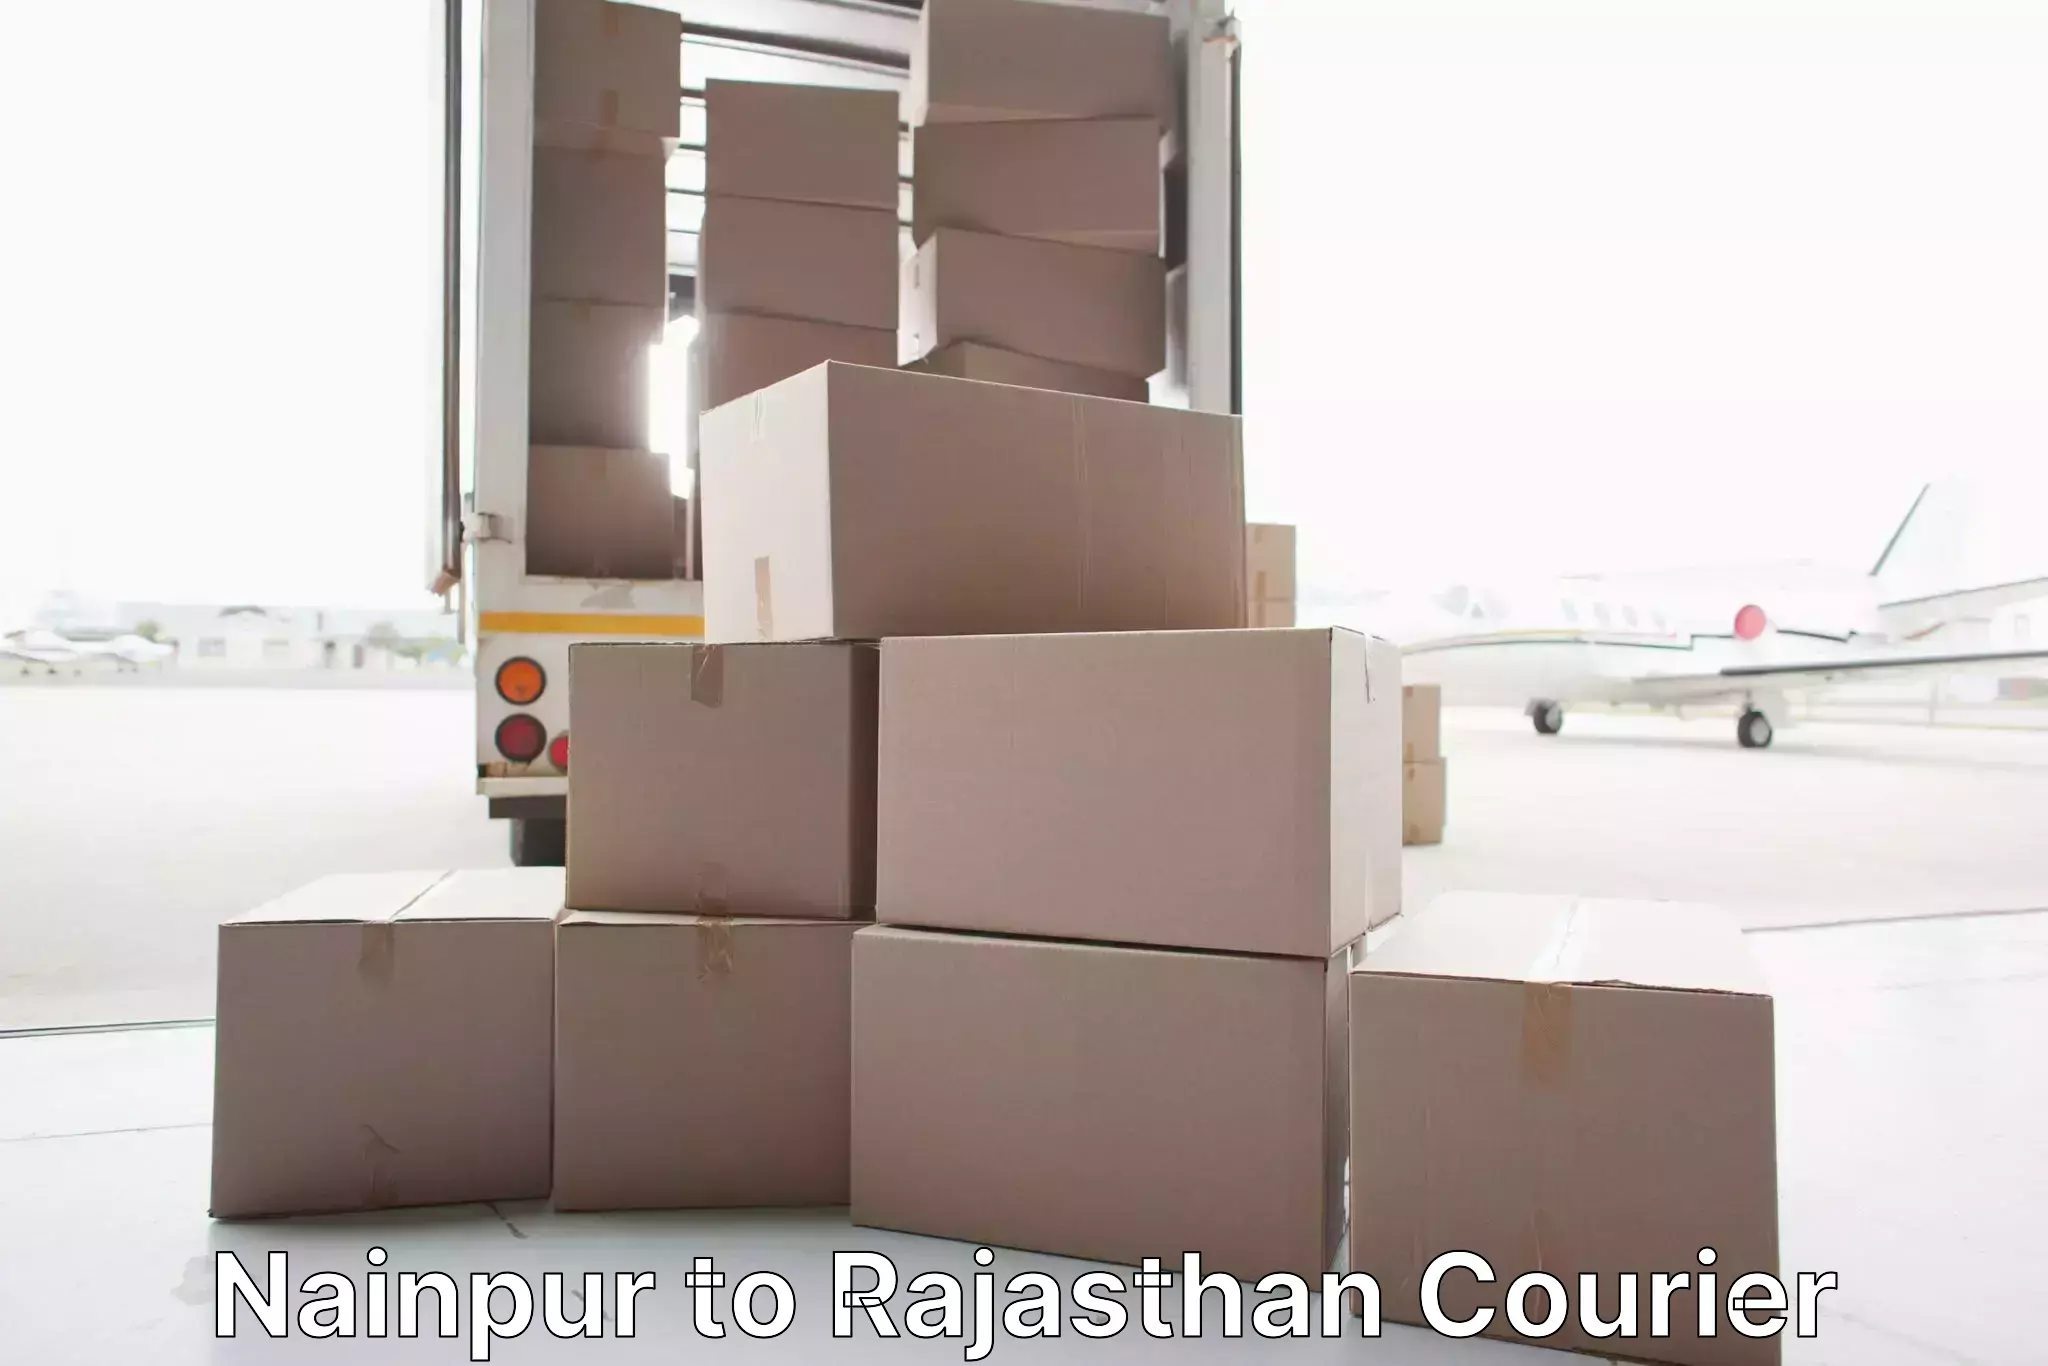 Trusted moving company in Nainpur to Morkheri